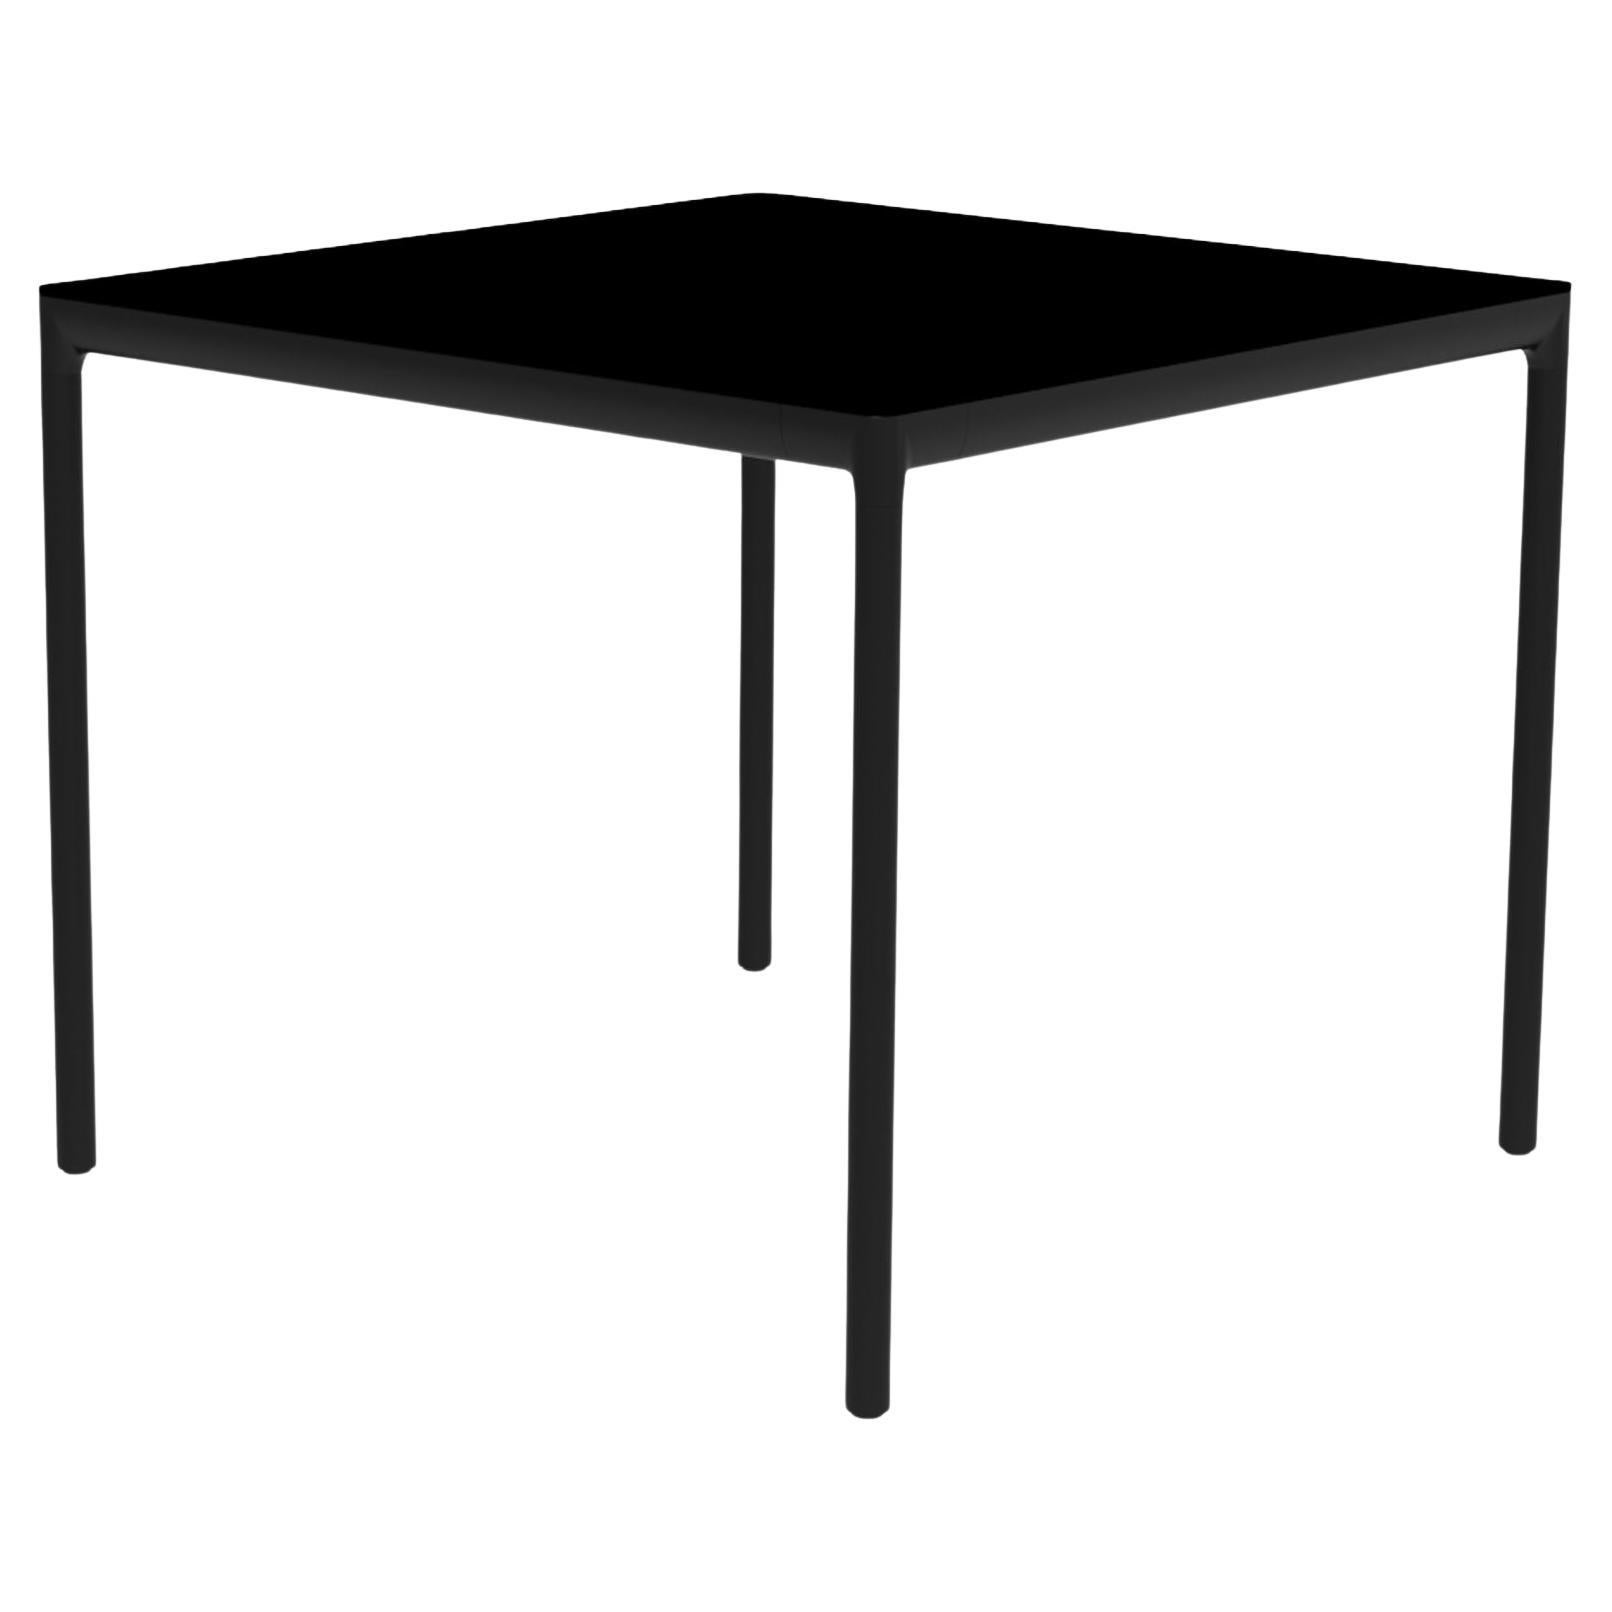 Ribbons Black 90 Table by Mowee For Sale